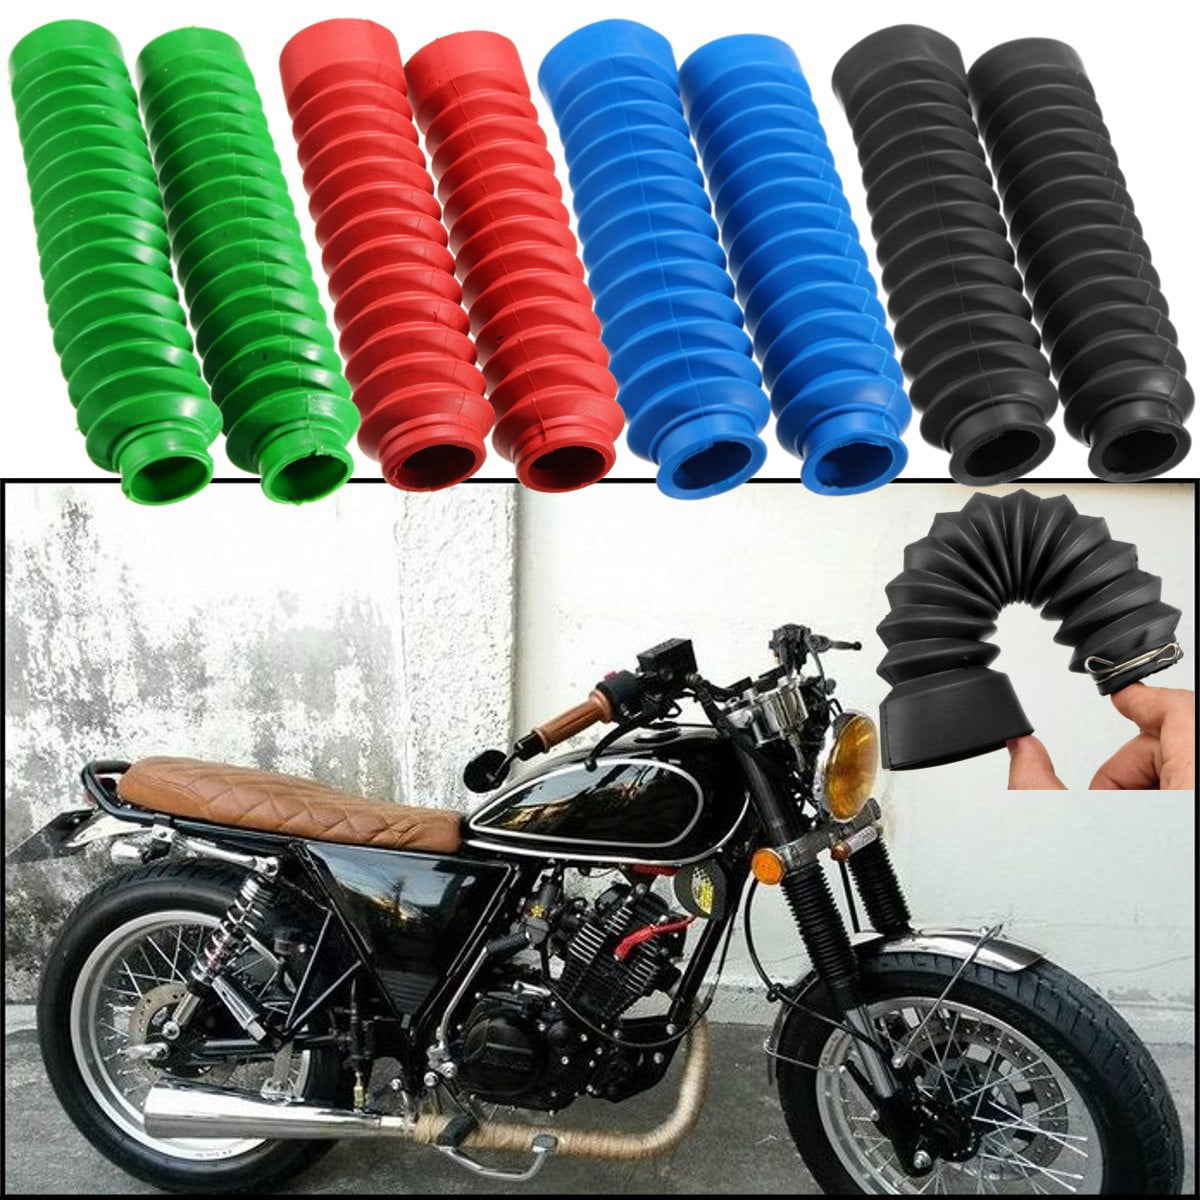 1 Pair Motorcycle Fork Cover,Black Motorcycle Front Fork Tubes Boots Rubber Sleeve Shock Cover for CQR ATV Dirt Bike 